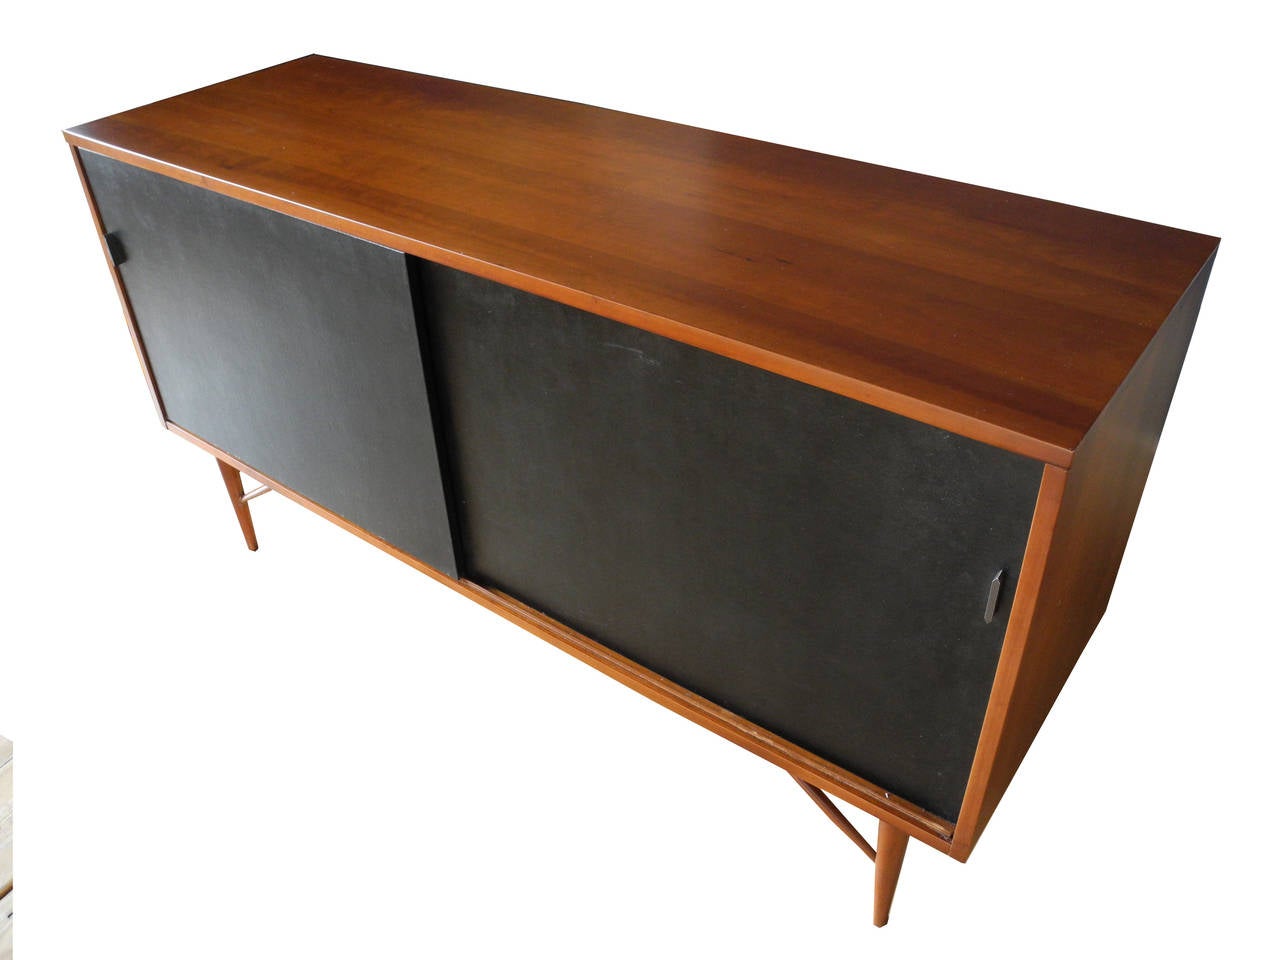 American Solid Cherry Cabinet Sideboard or Credenza by Kipp Stewart for Winchendon